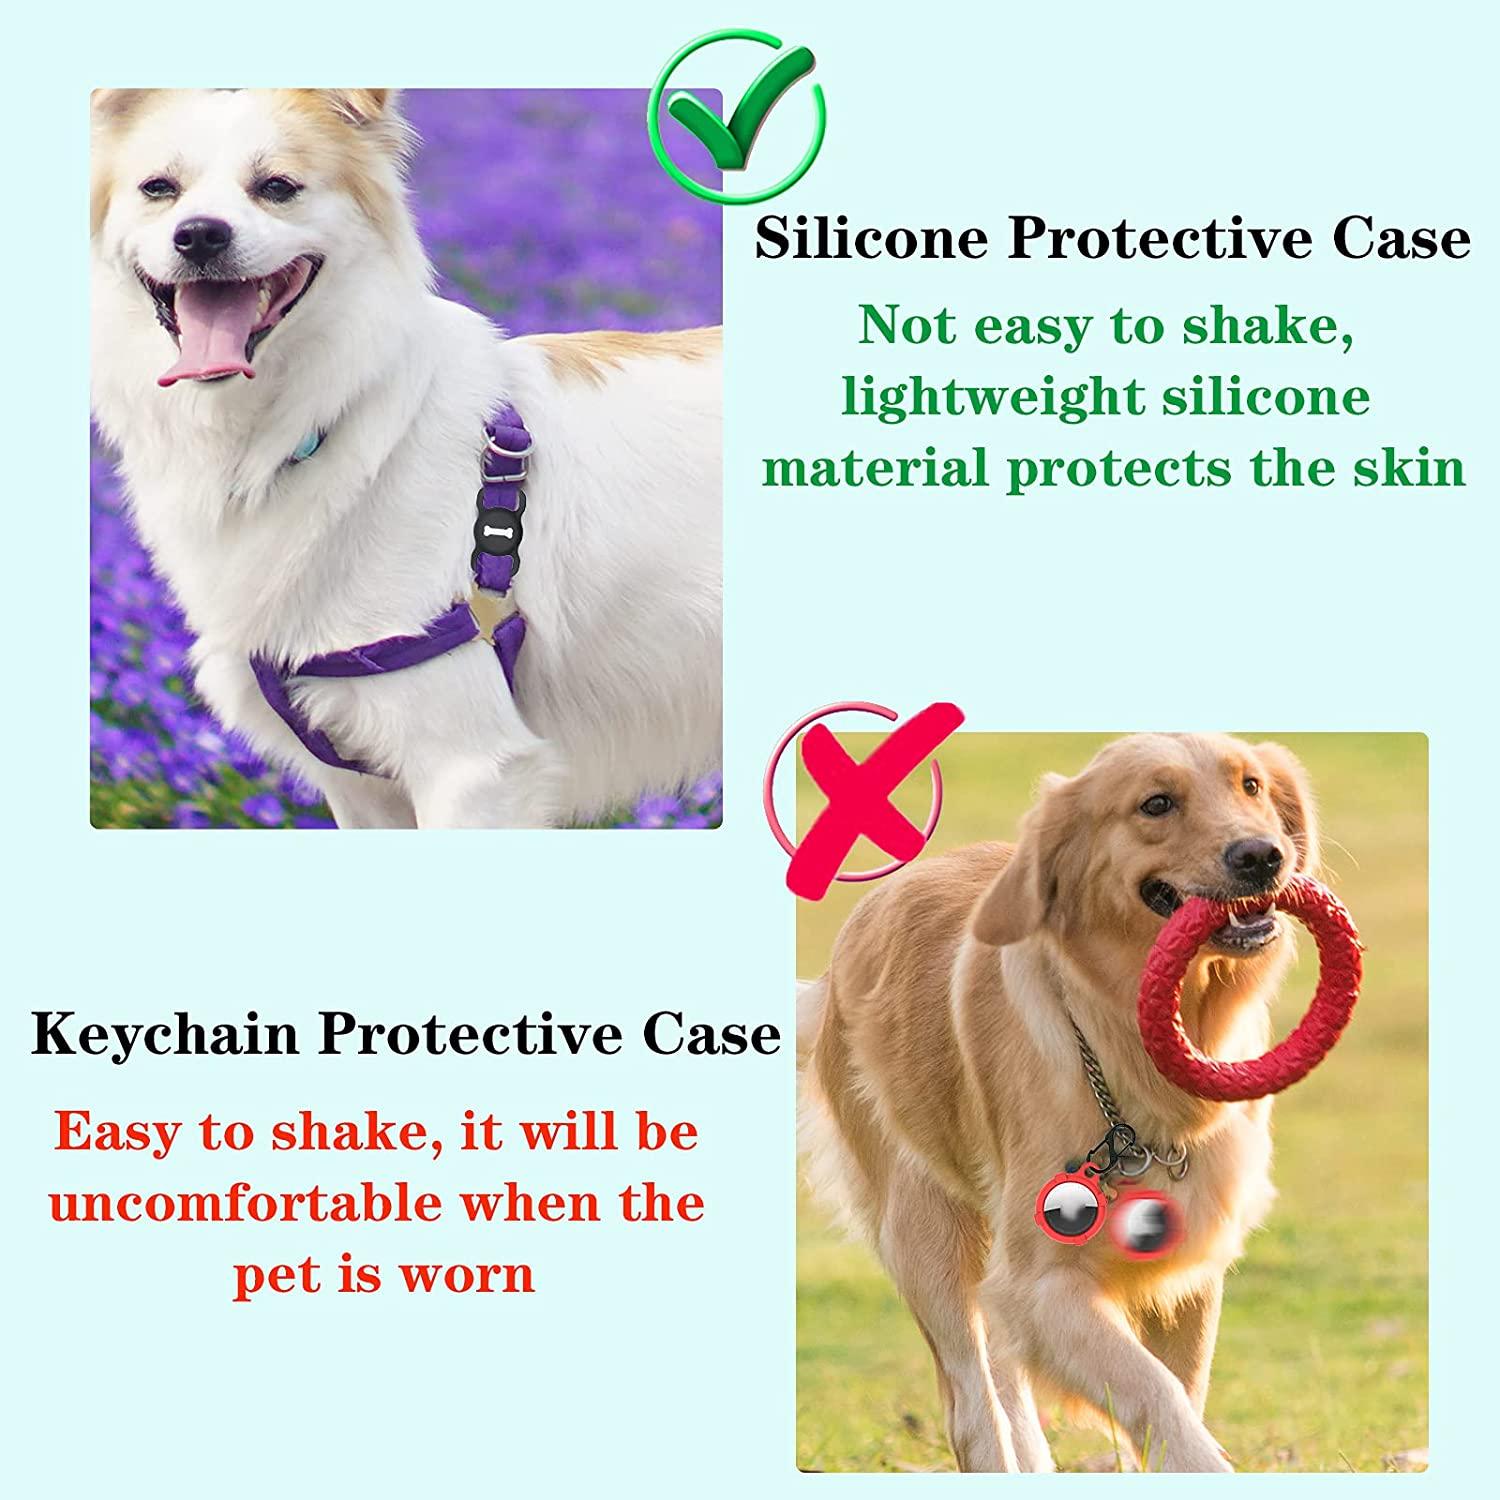 Airtag Dog Cat Collar Holder Case For Apple Air Day - Protective On